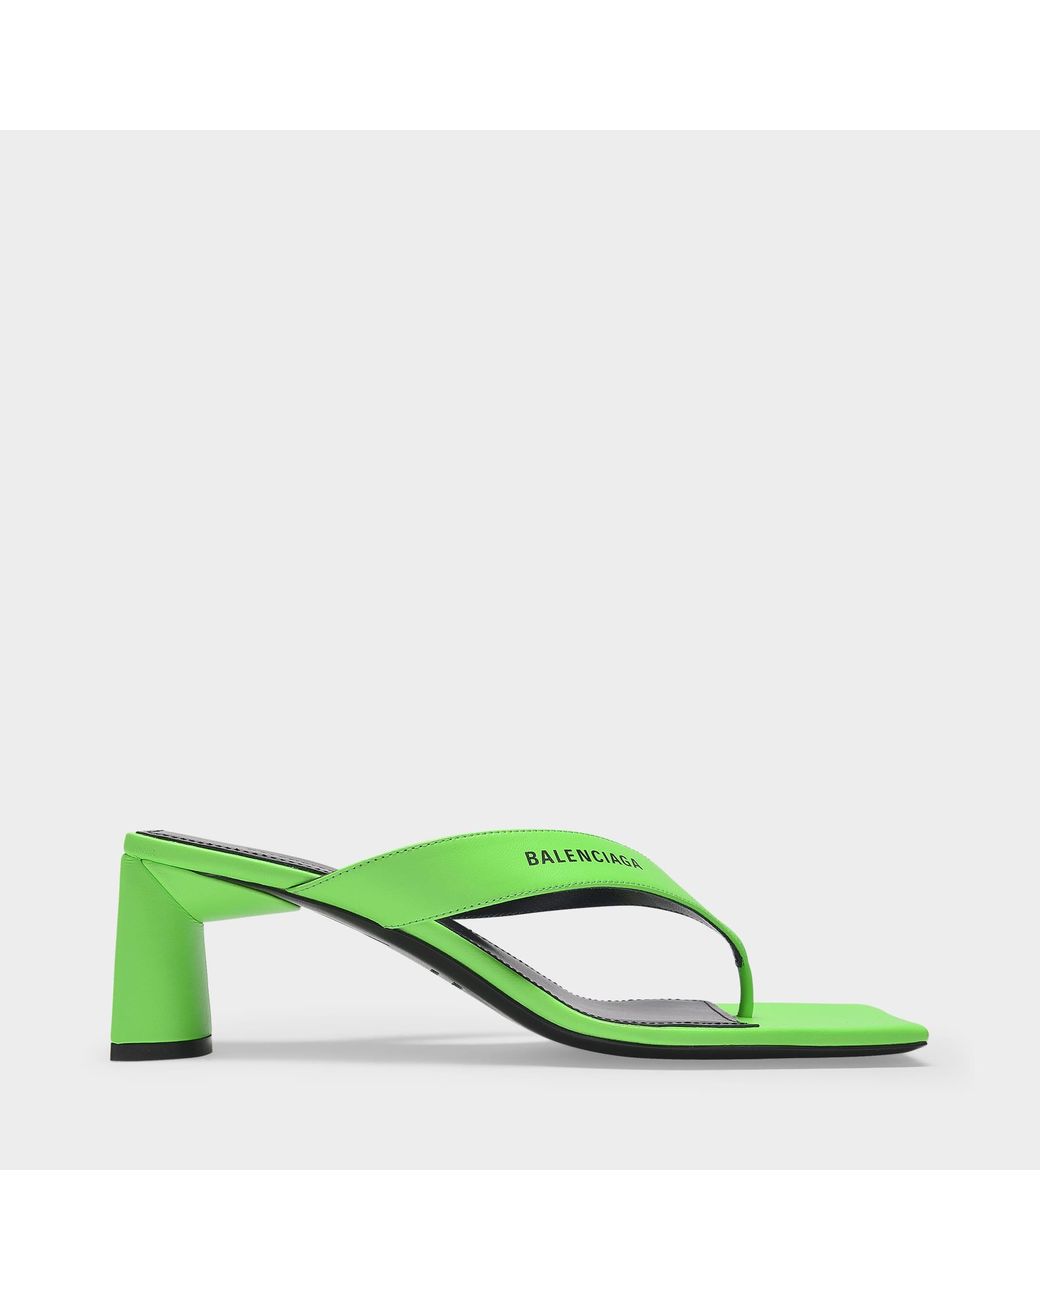 Balenciaga Double Square 60mm Sandals In Fluo Green Leather | Lyst